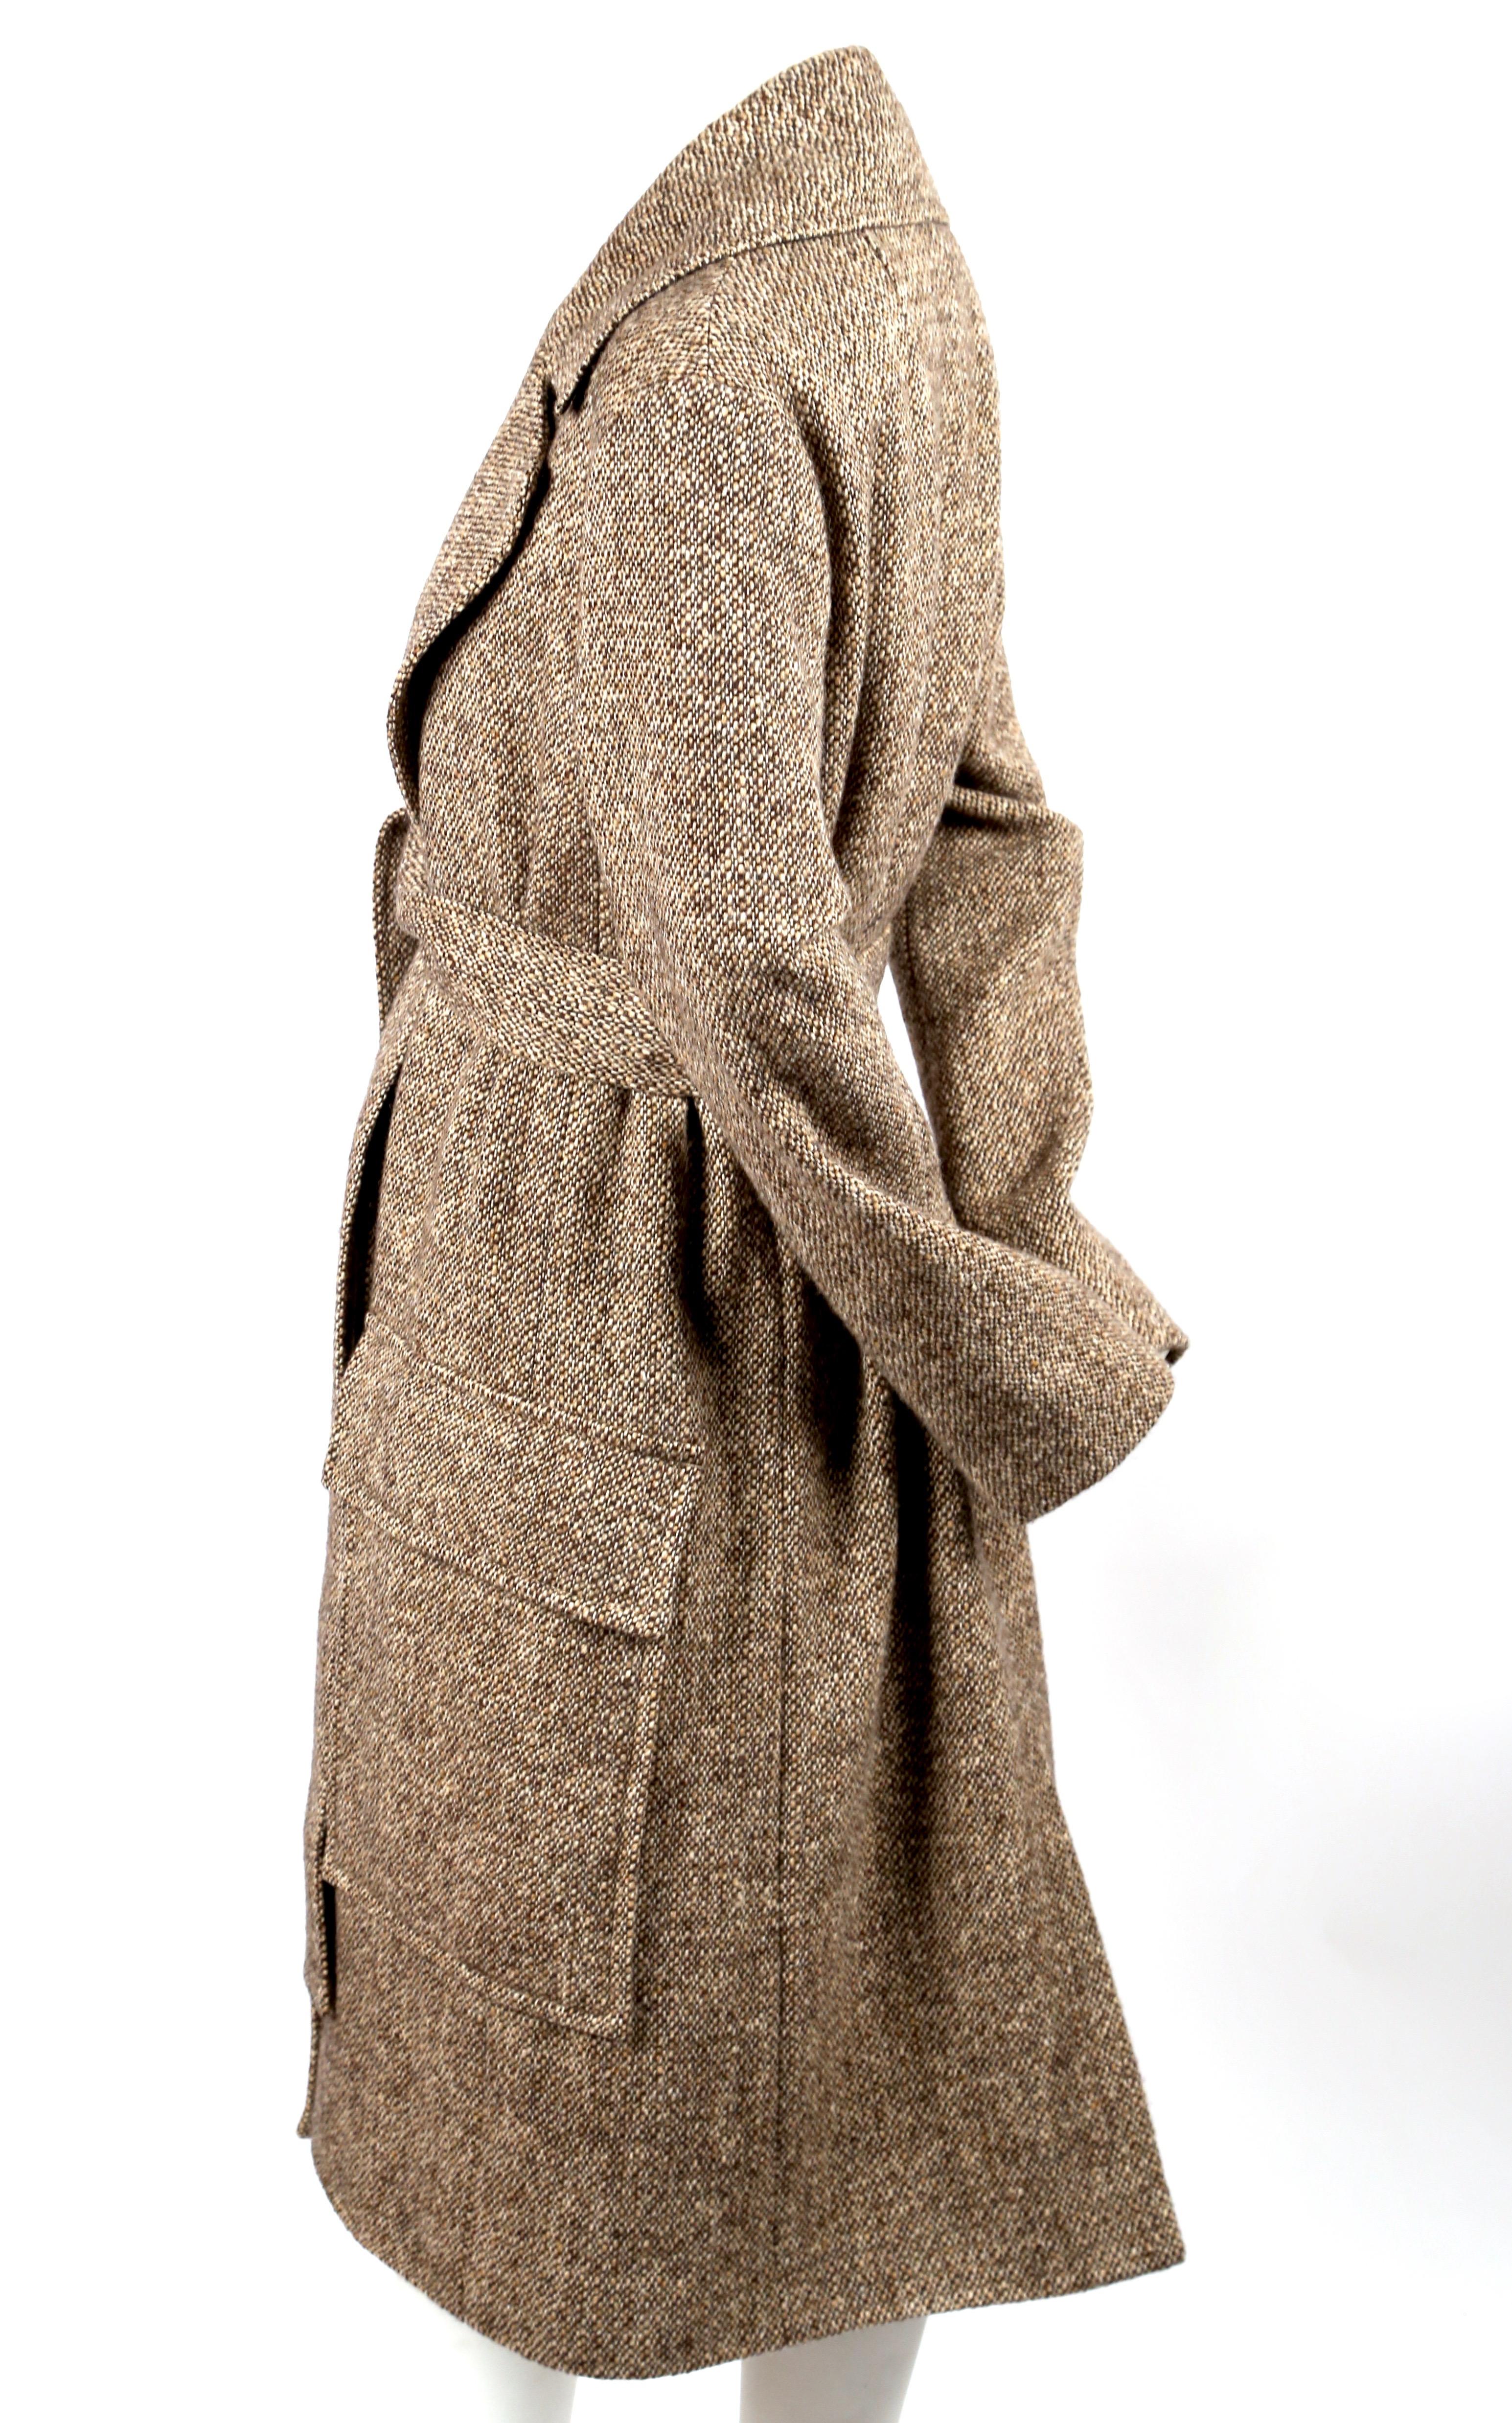 Tan, tweed wool coat with large notched collar, oversized patch pockets and waist tie designed by Phoebe Philo for Celine. French size 38. Sizing is somewhat flexible due to belt closure. Fully lined.  Made in France. Fabric content: 100%